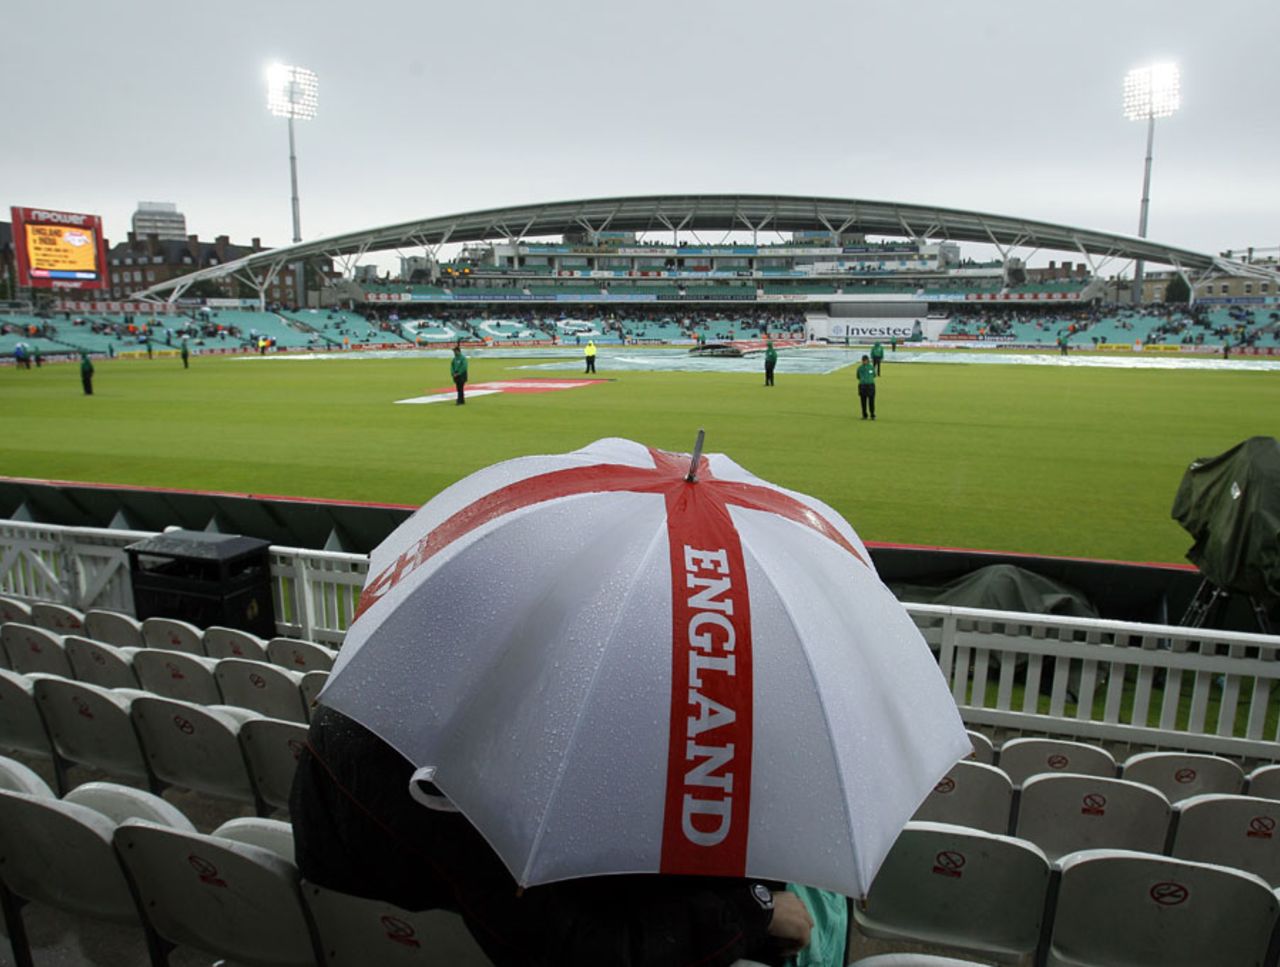 Rain washed out most of the first day at The Oval, England v India, 4th Test, The Oval, 1st day, August 18, 2011